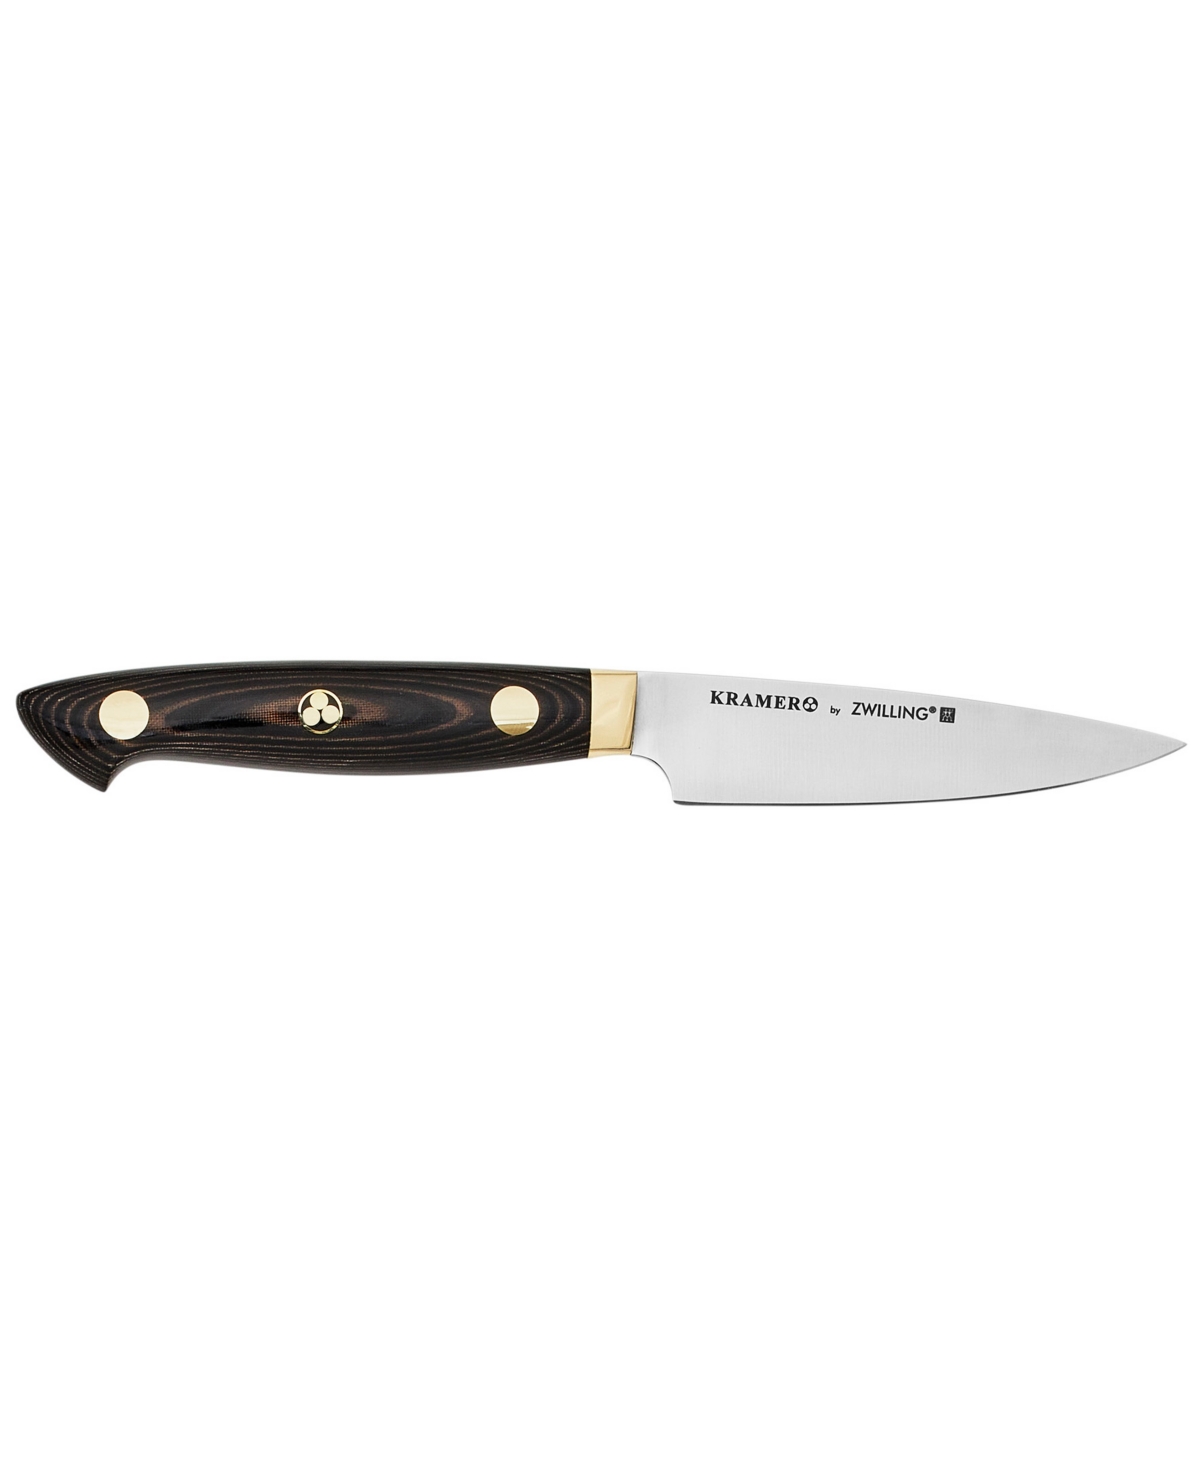 Zwilling Bob Kramer Carbon 2.0 Paring Knife, 3.5" In Brown And Silver-tone